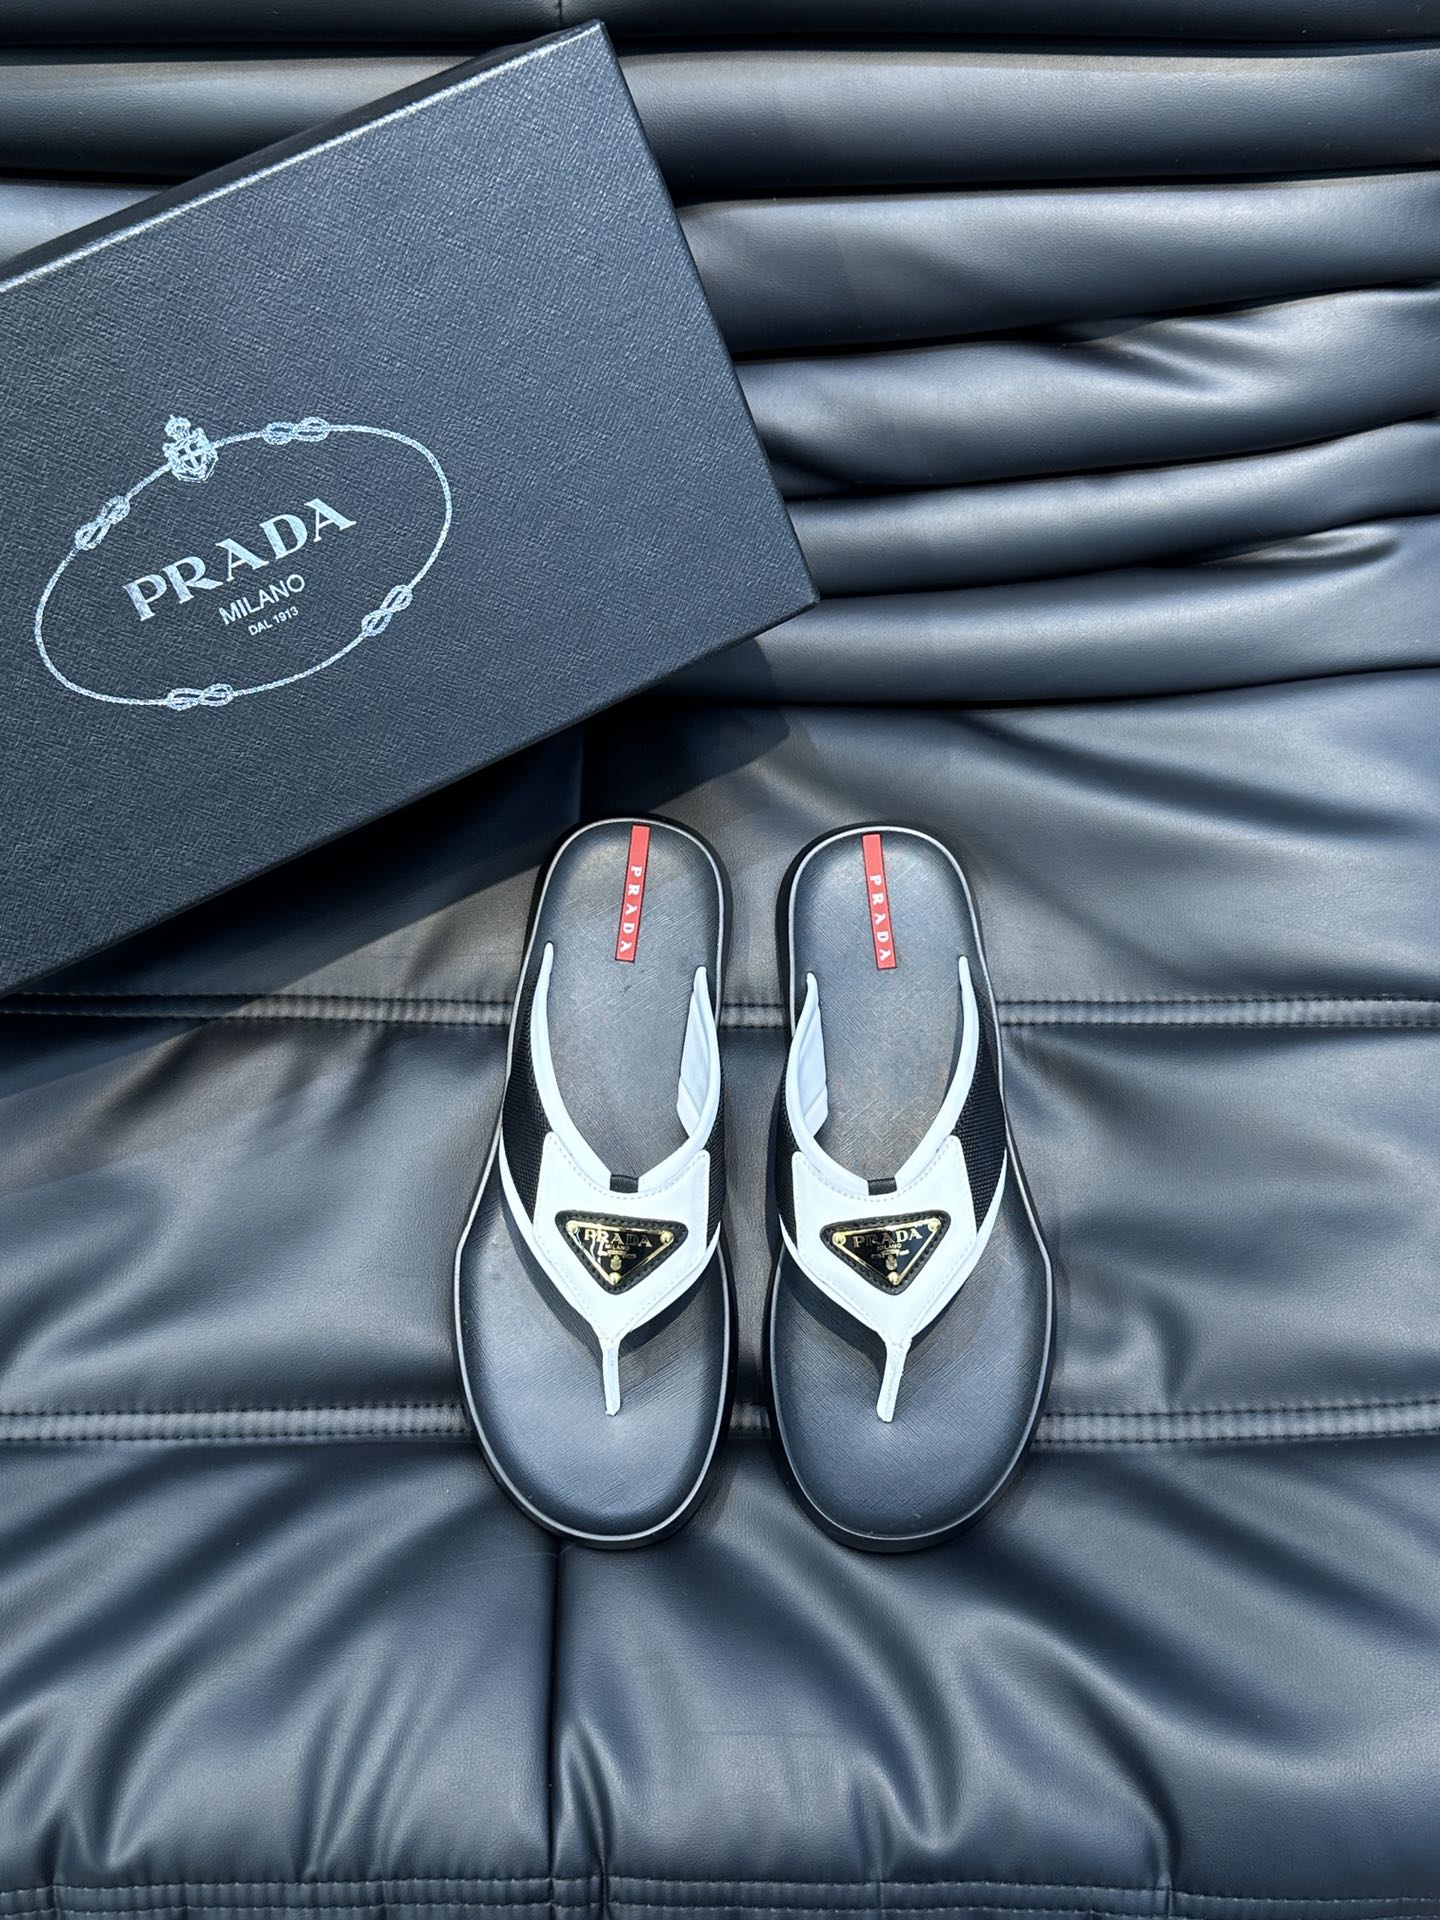 Prada Shoes Flip Flops Sandals Slippers Men Genuine Leather Rubber Summer Collection Casual